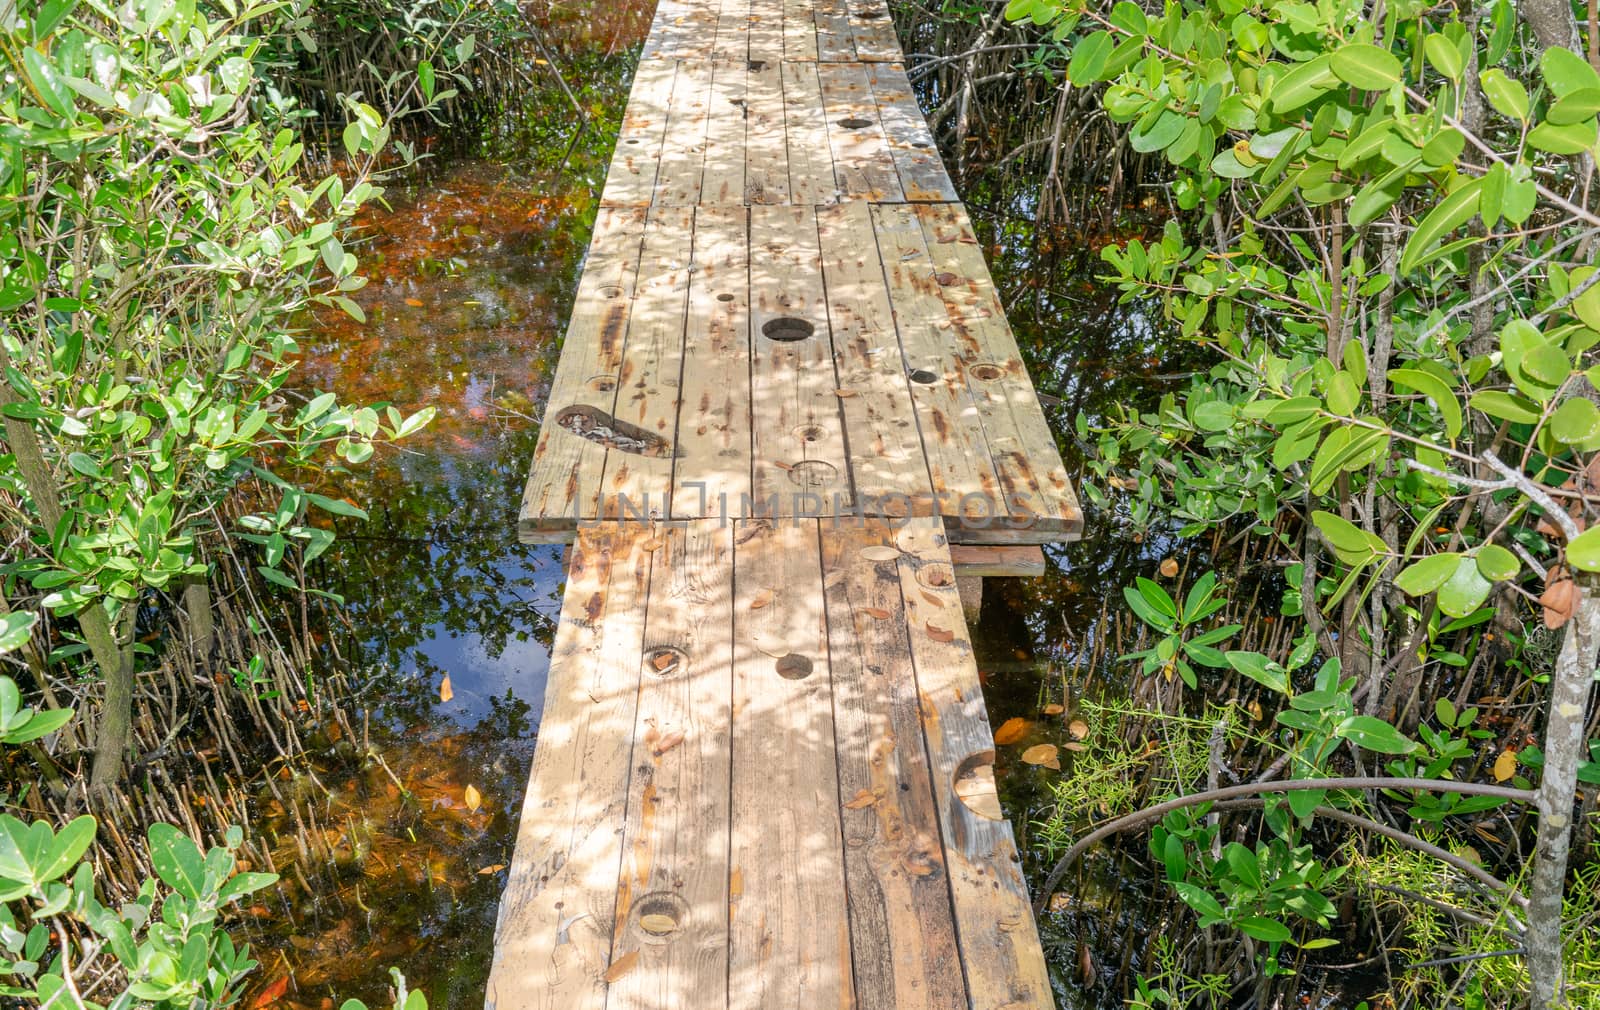 Bridge made of recycled wood and undergrowth on the sides